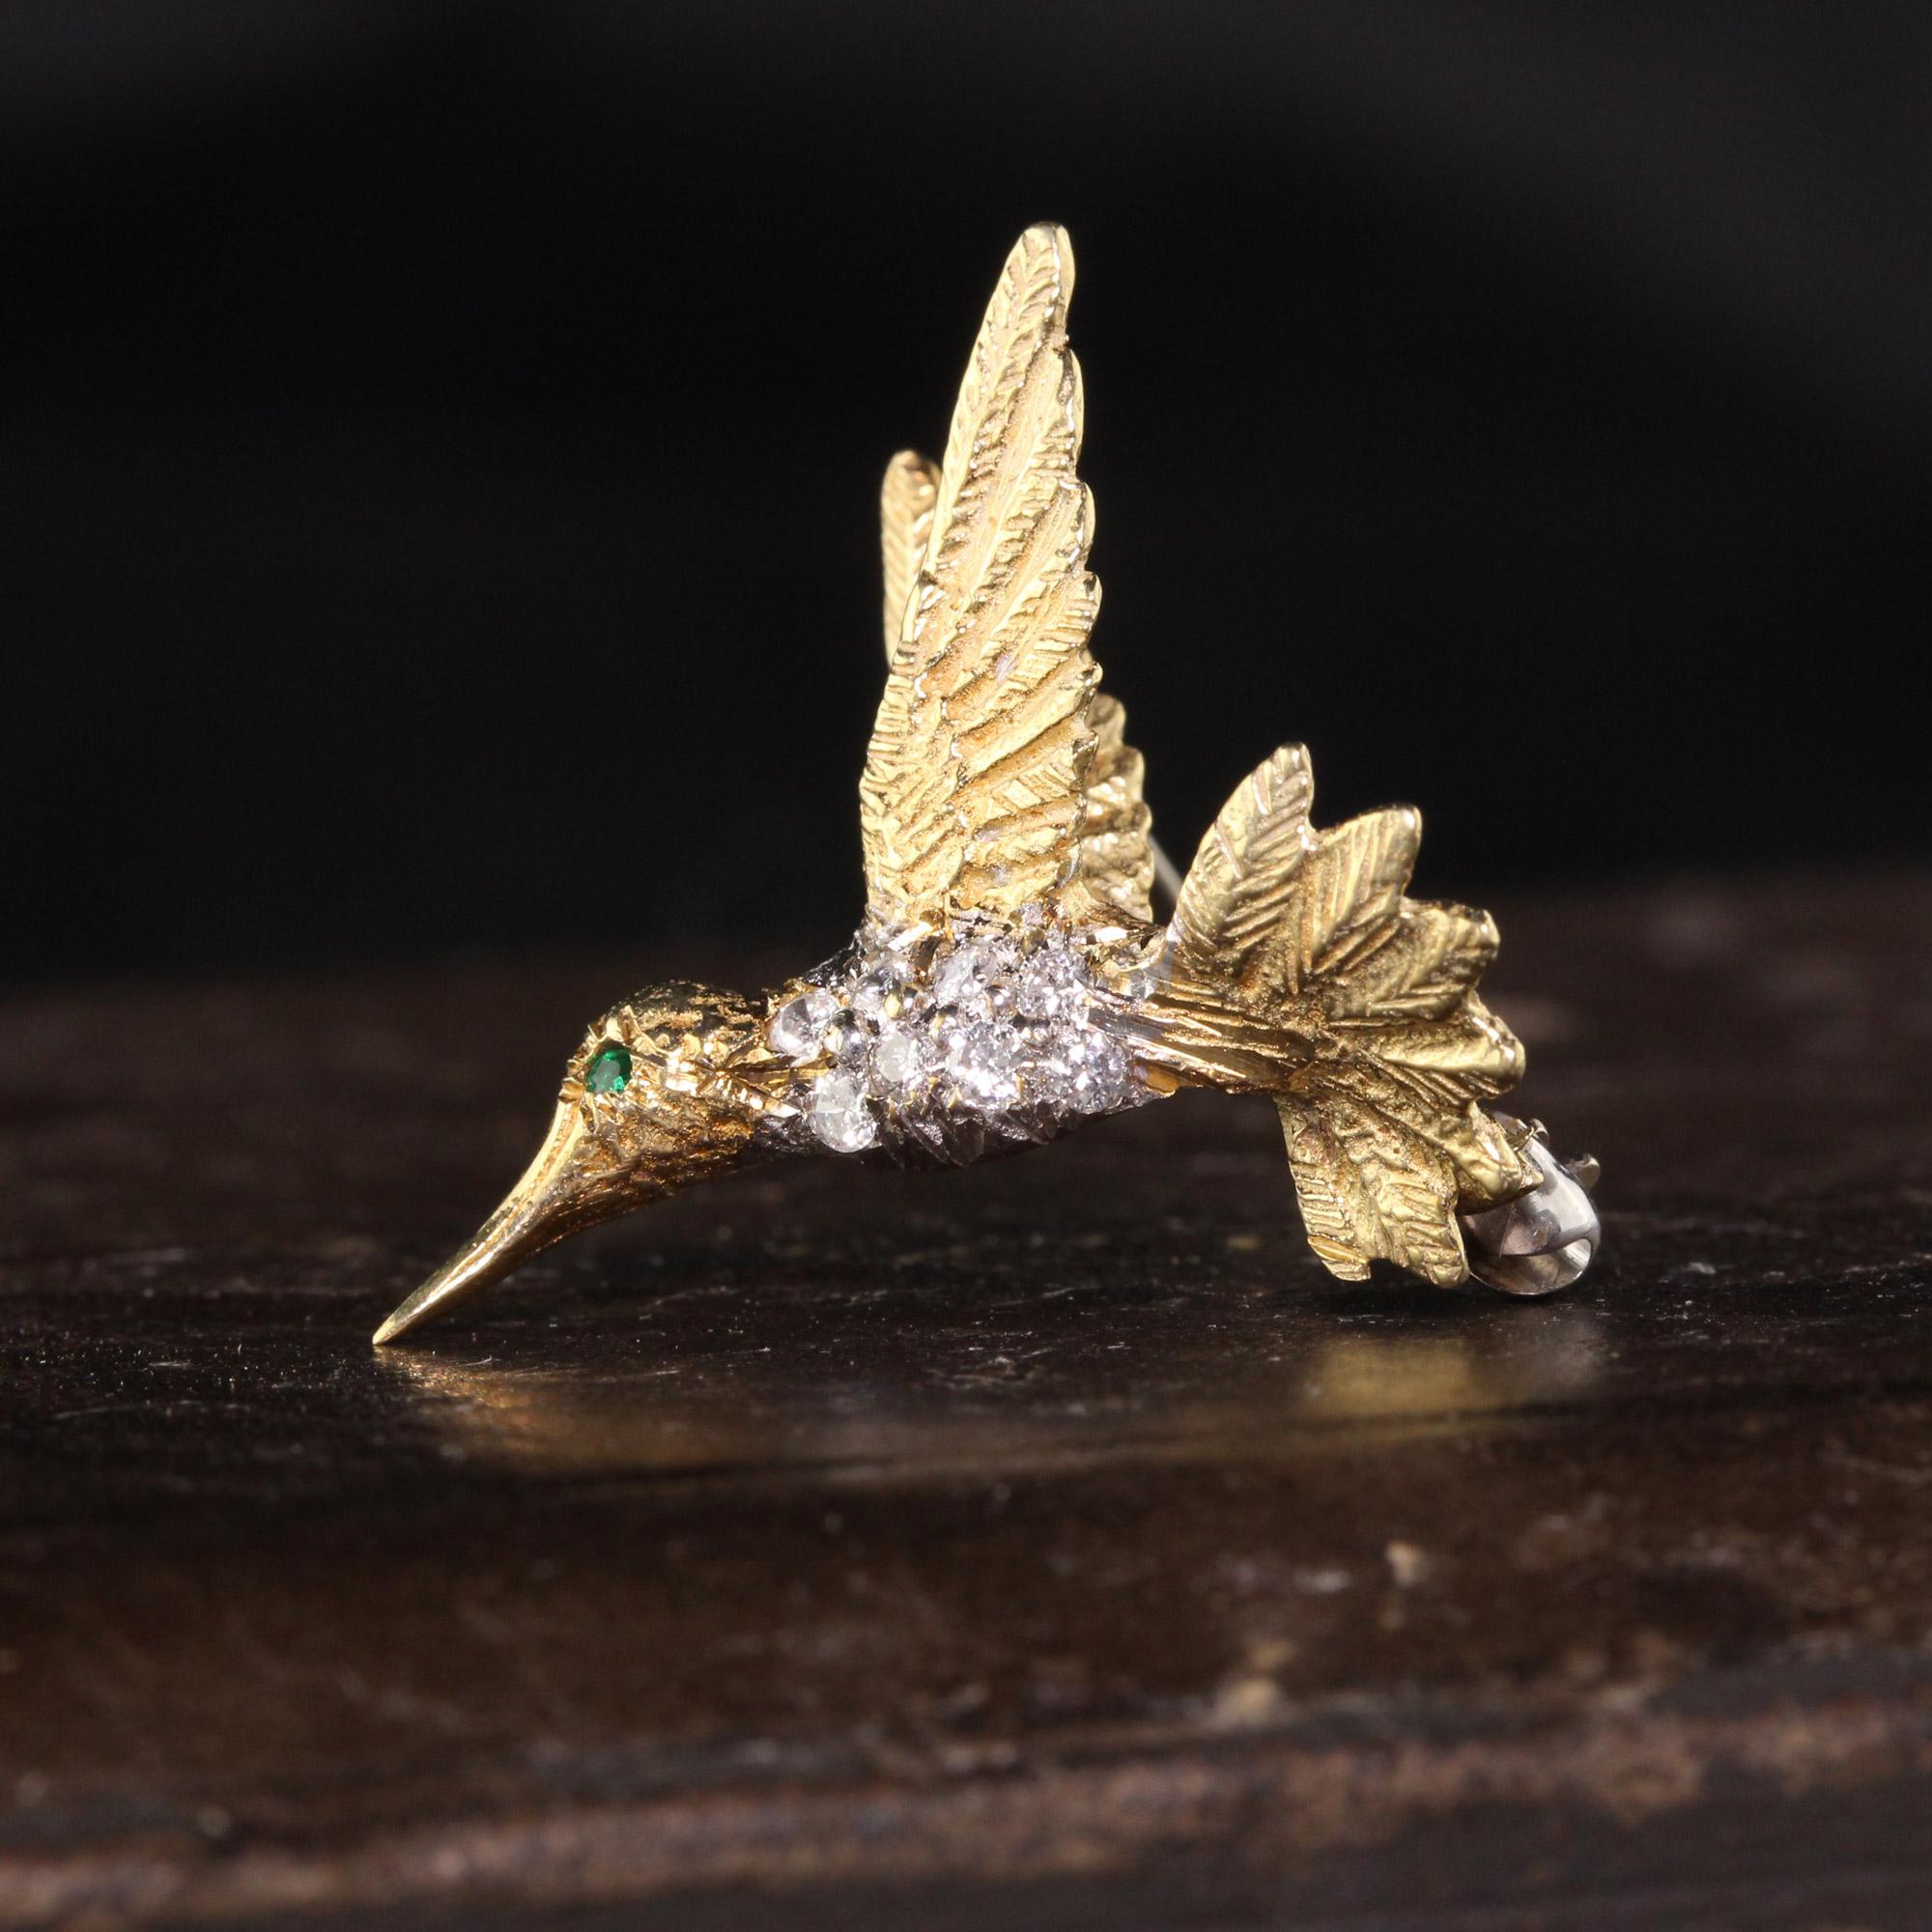 A stunning Vintage 14K Yellow Gold Diamond Hummingbird Pin. Amazing details and beautifully crafted!

Item #P0100

Metal: 14K Yellow Gold 

Weight: 3.90 Grams

Diamond Weight: Approximately 0.15 ct rose cut diamonds

Emerald: .01 ct emerald